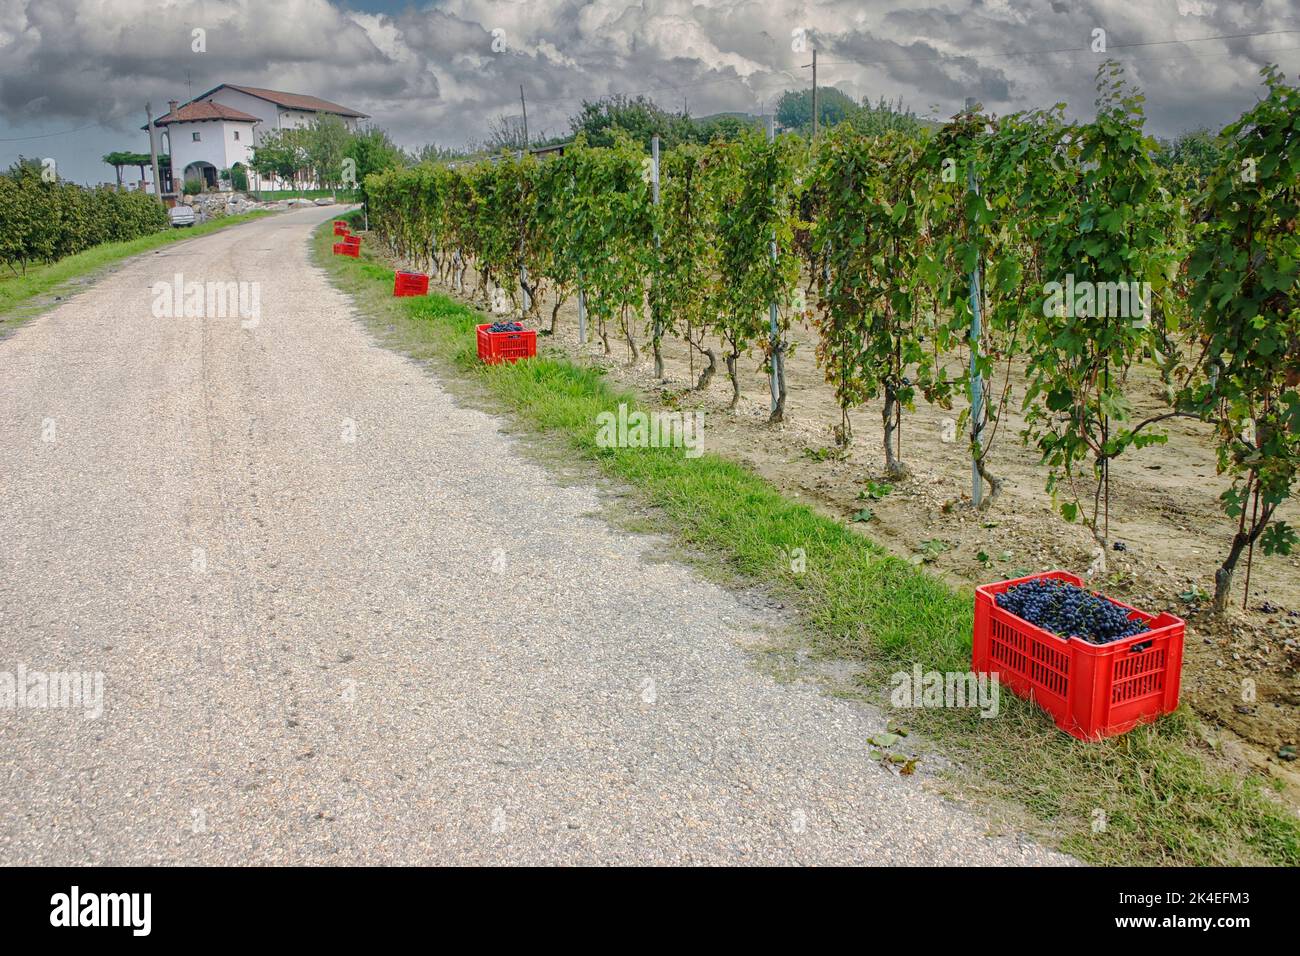 Red crates with blue grapes waiting for pick up at harvest time at a vineyard in Italy Stock Photo